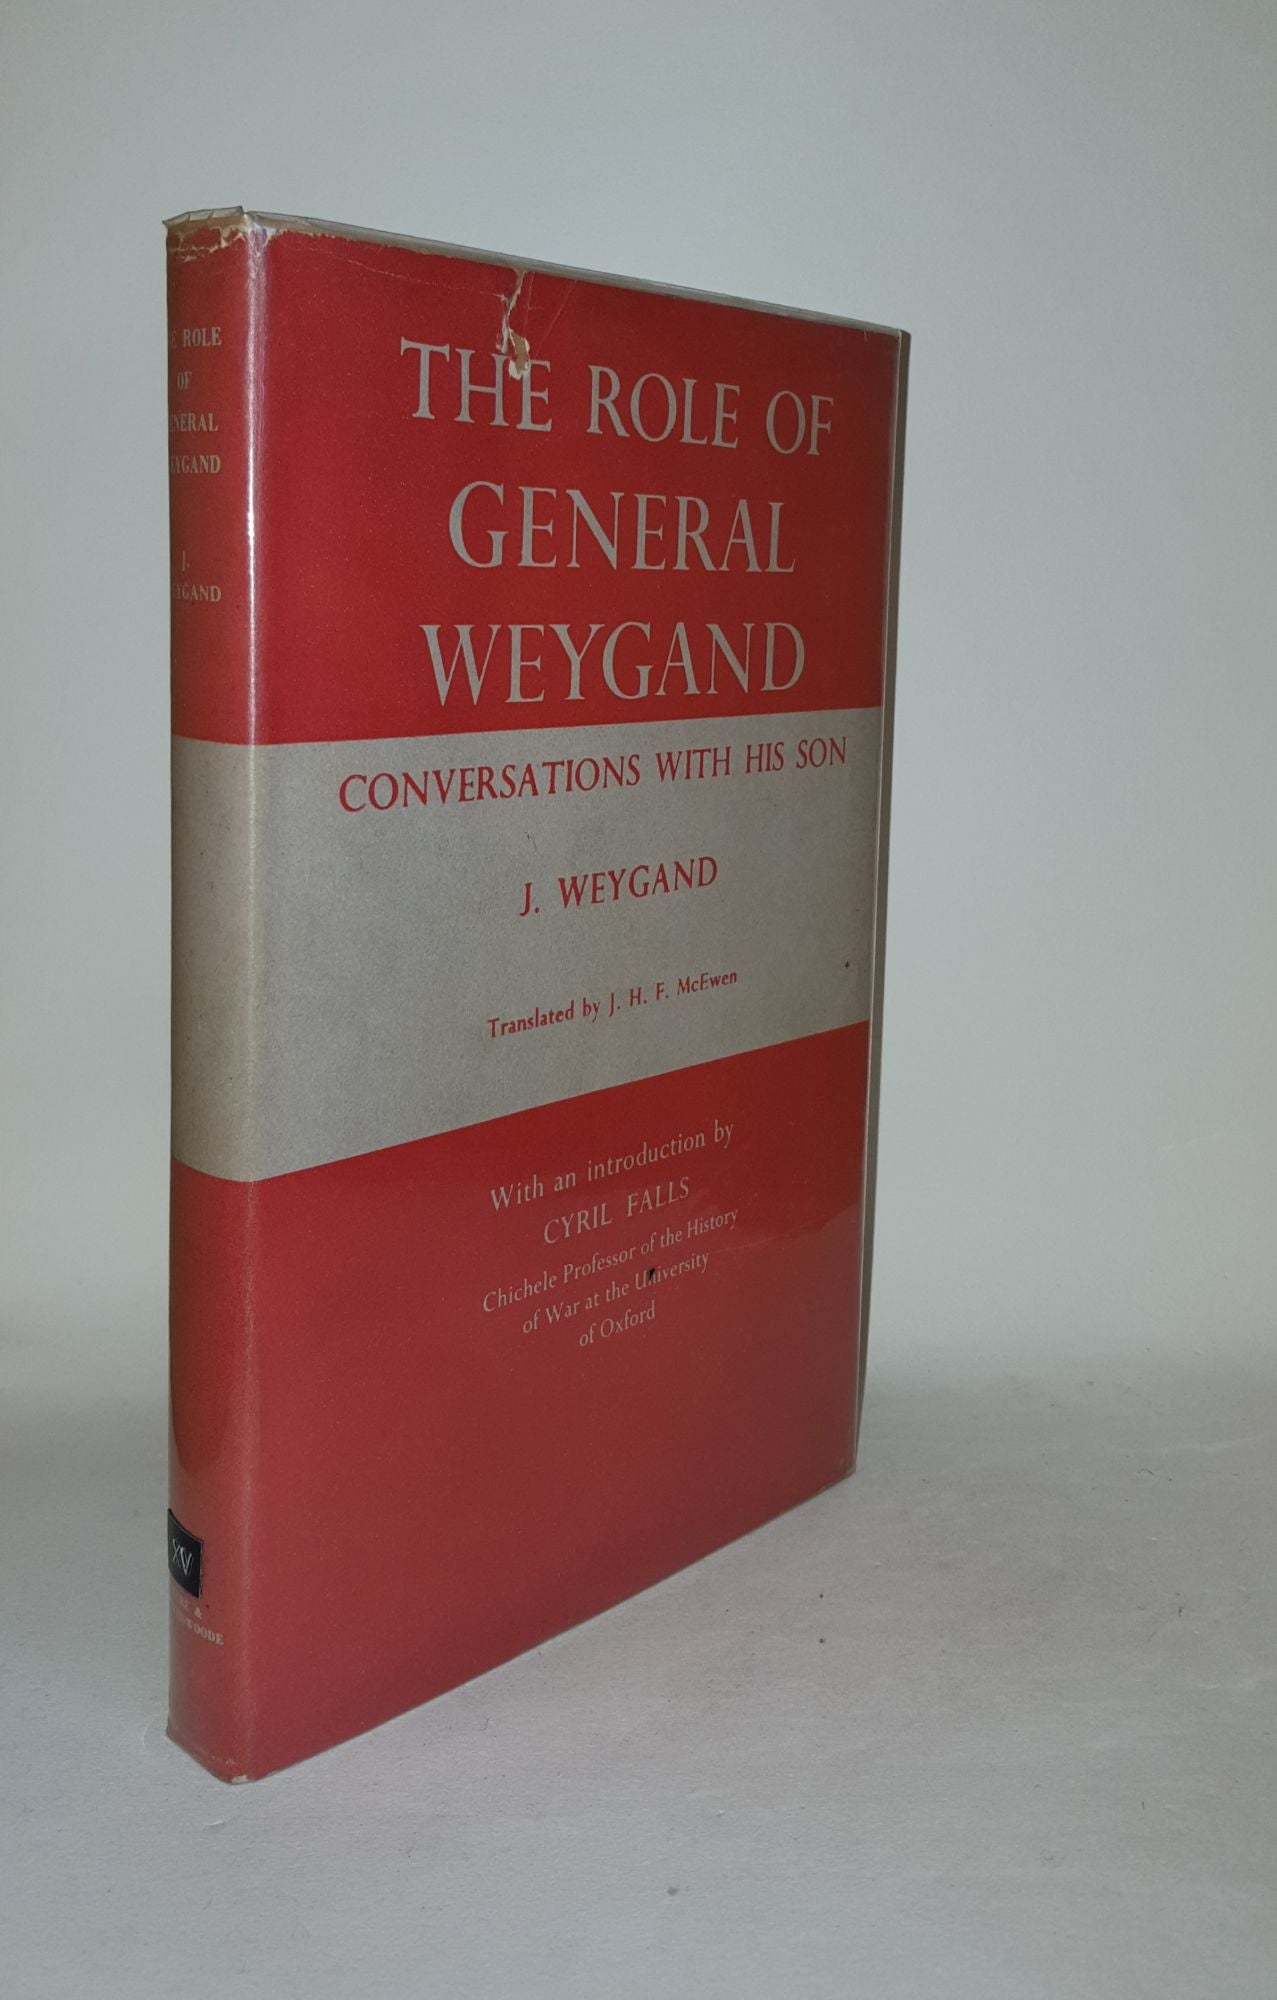 WEYGAND J., McEWEN J.H.F. - The Role of General Weygand Conversations with His Son